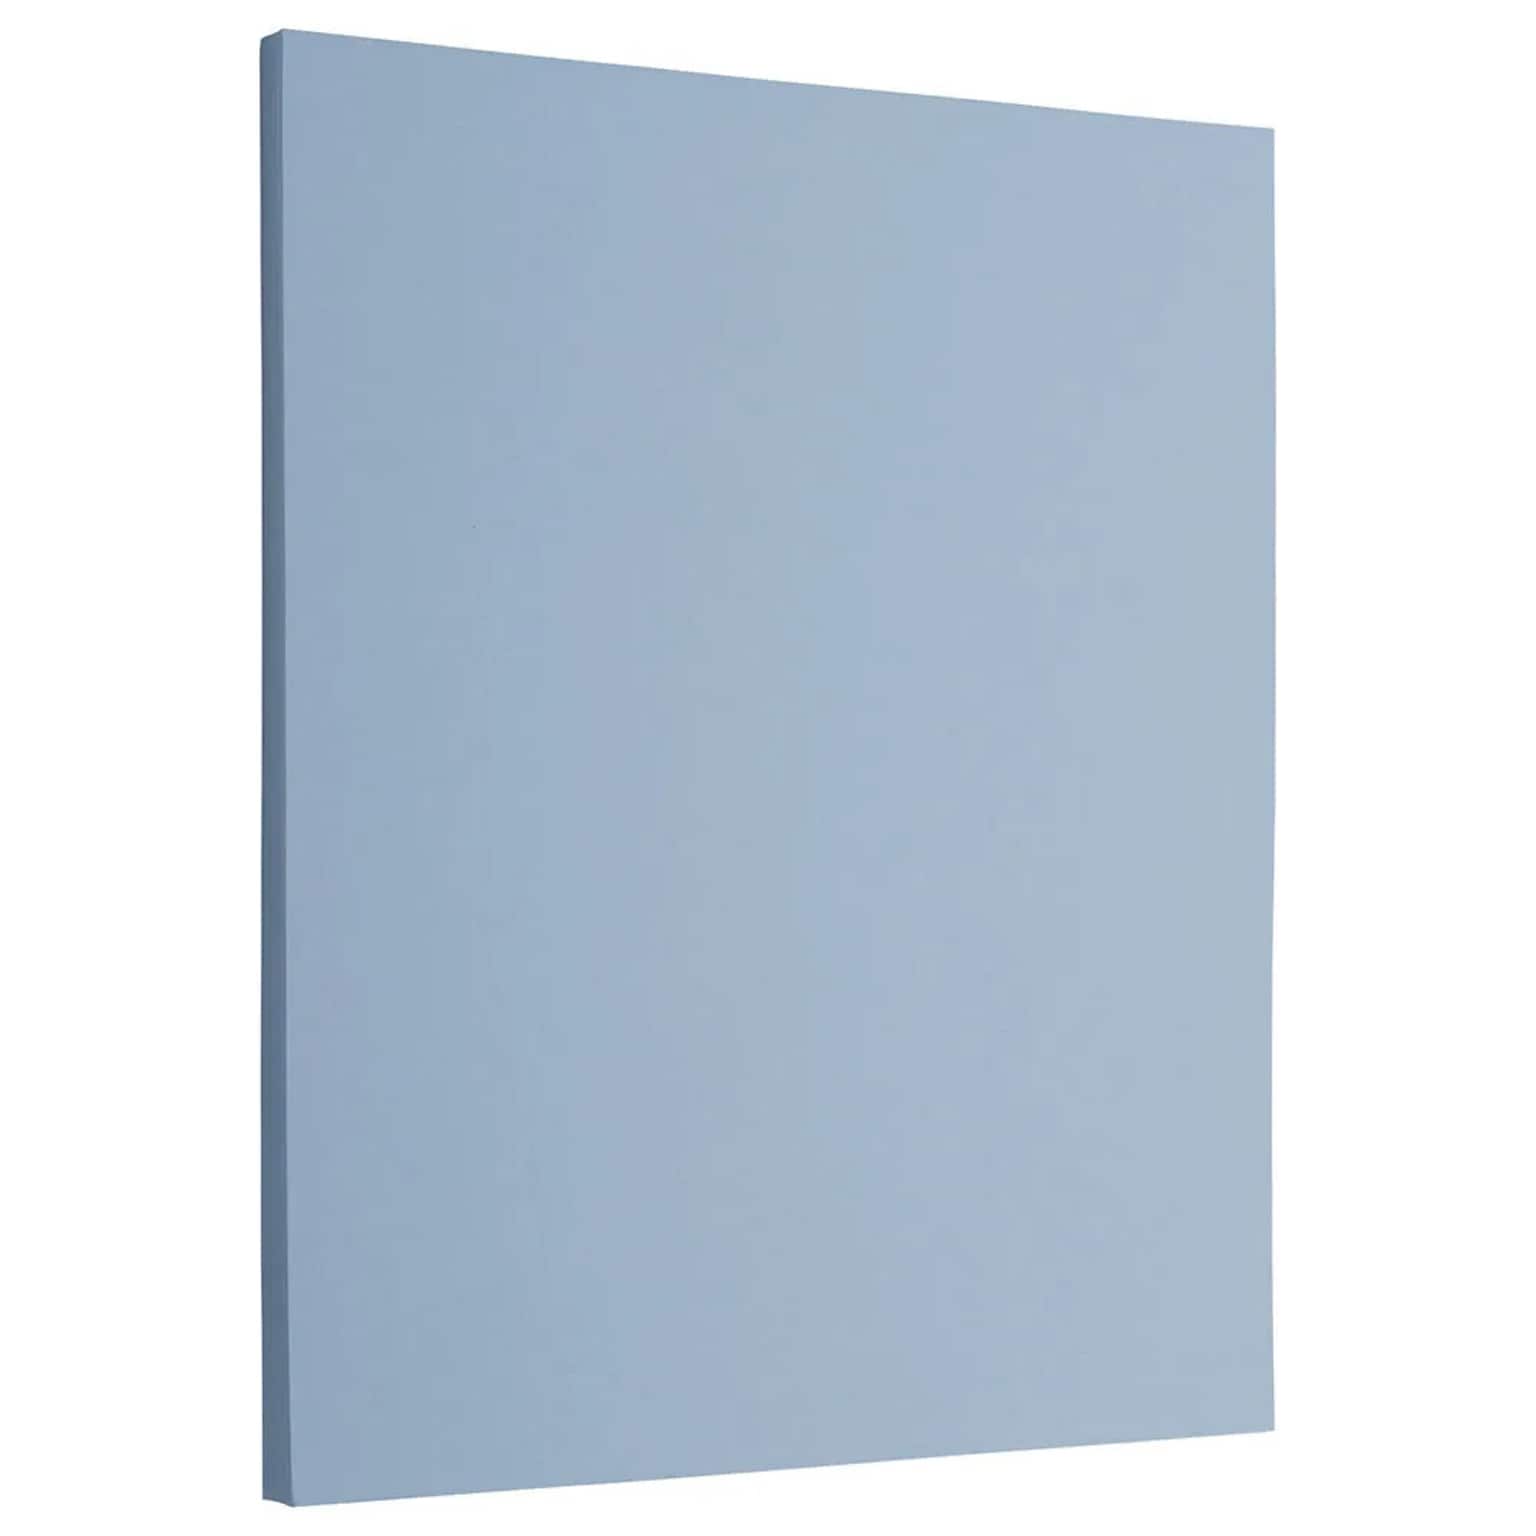 JAM Paper 8.5 x 11, 28 lbs., Baby Blue, 100 Sheets/Ream (5155794G)